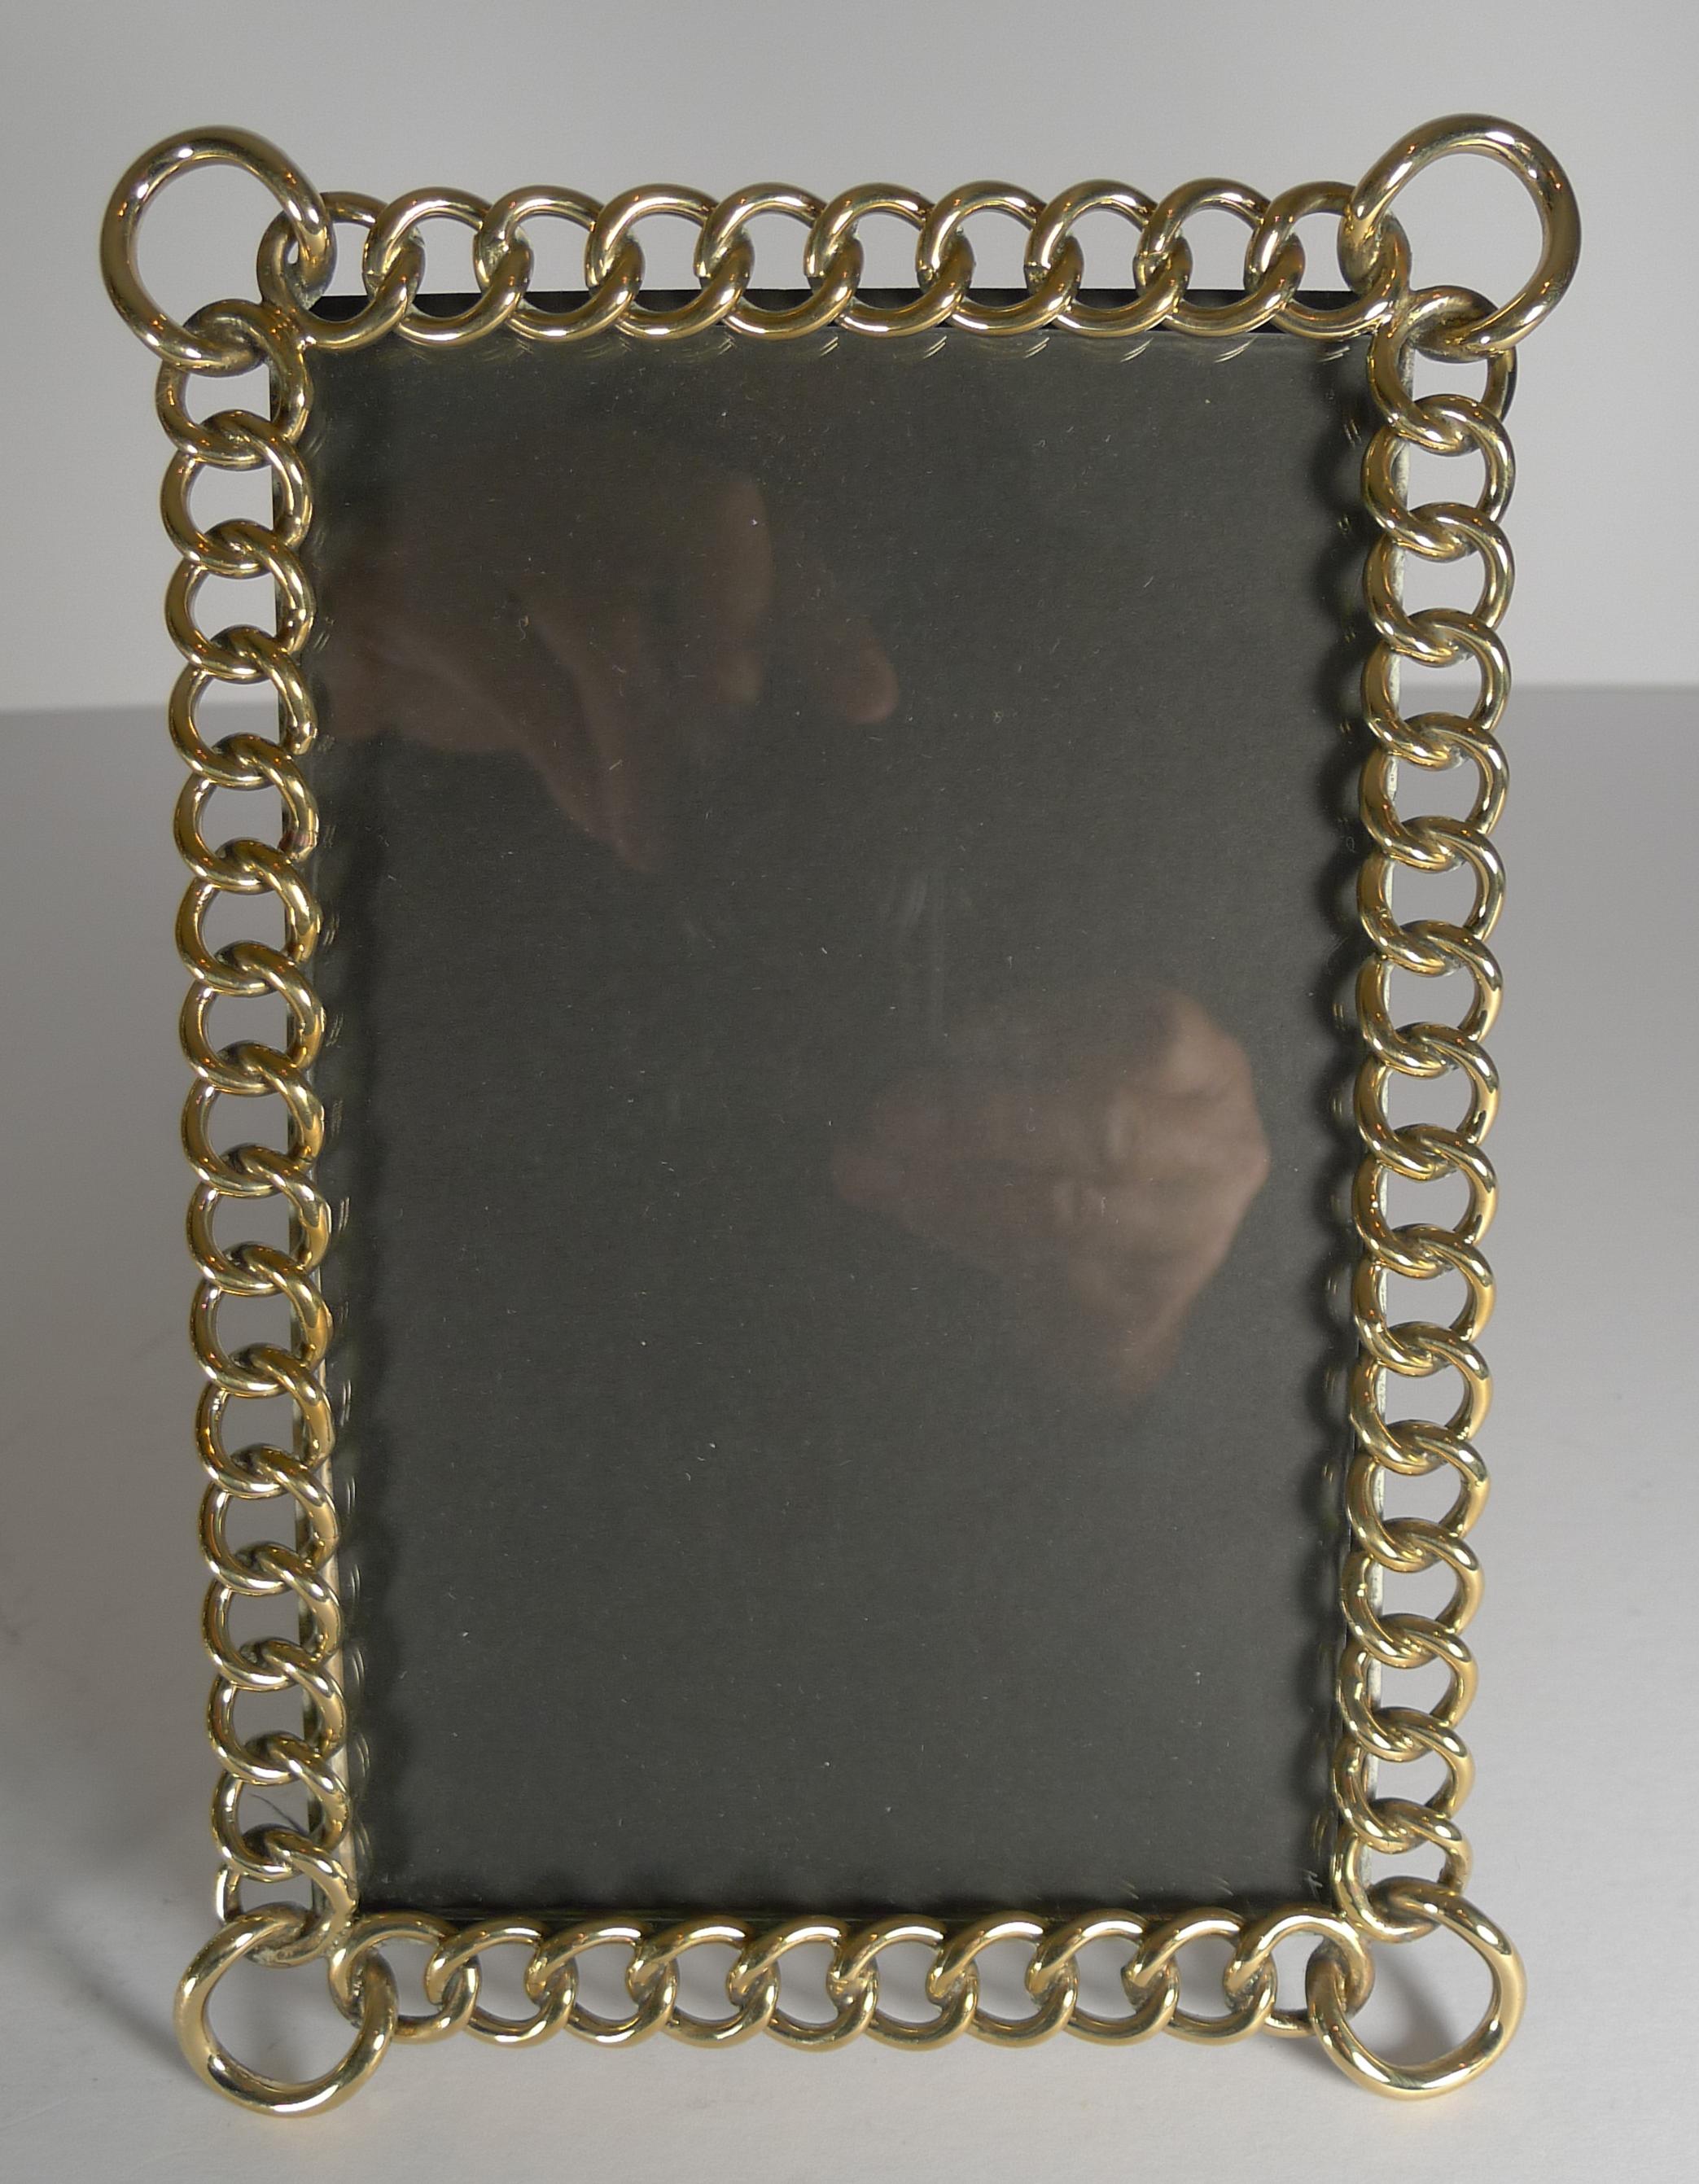 A handsome pair of late Victorian English photograph frames made from interlocking solid brass rings and standing on the original folding easel stands.

Victorian in era dating to circa 1890. Each measuring: 8